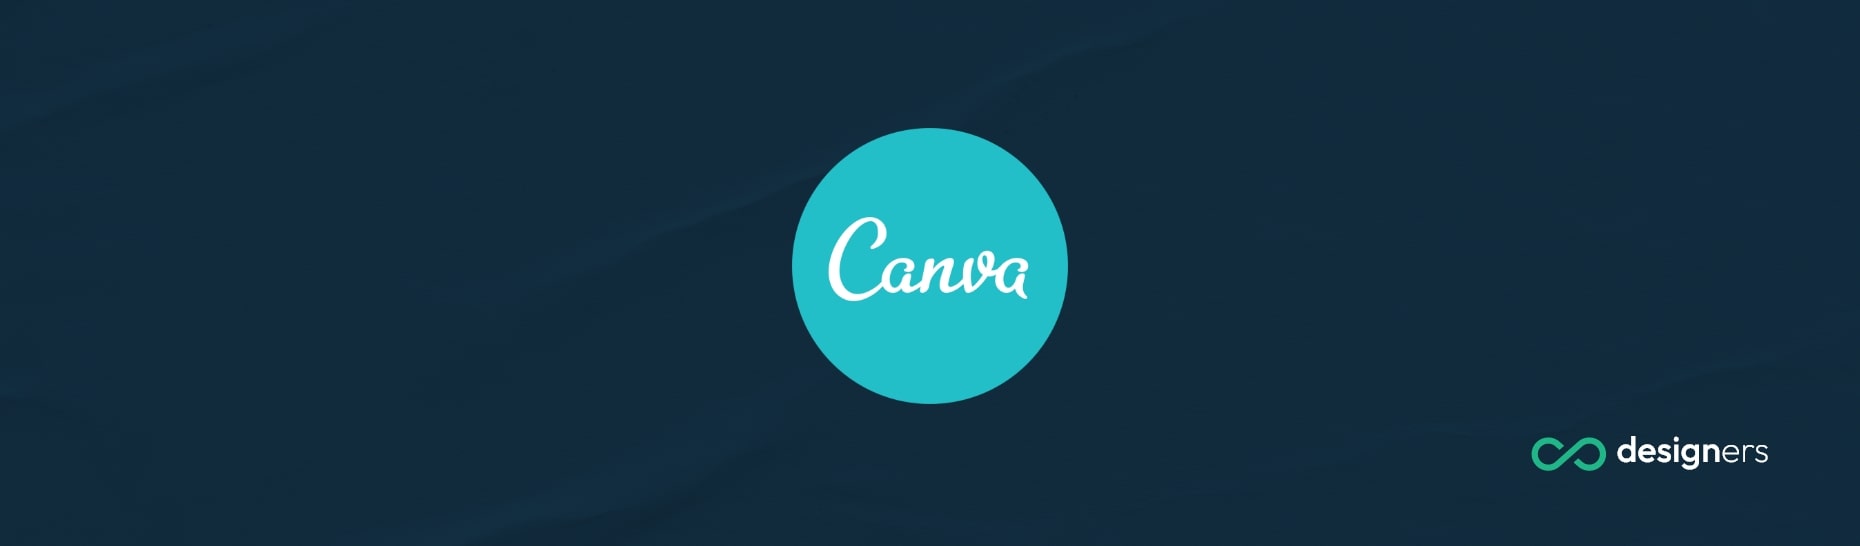 Is Canva Good for Photo Editing?